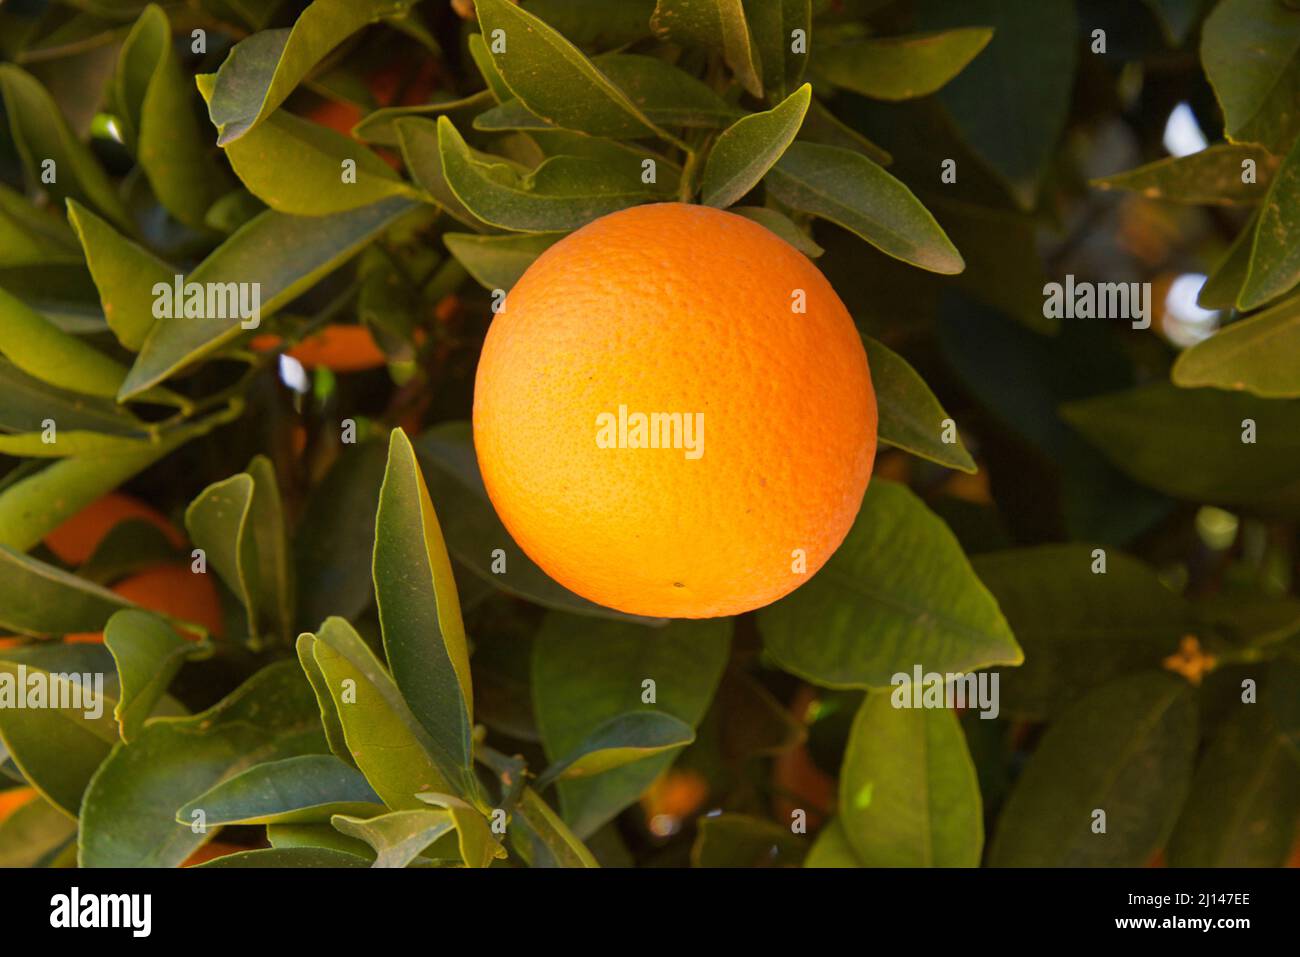 Close up of one Navel Orange growing, ripening on the tree surrounded by green leaves. Stock Photo